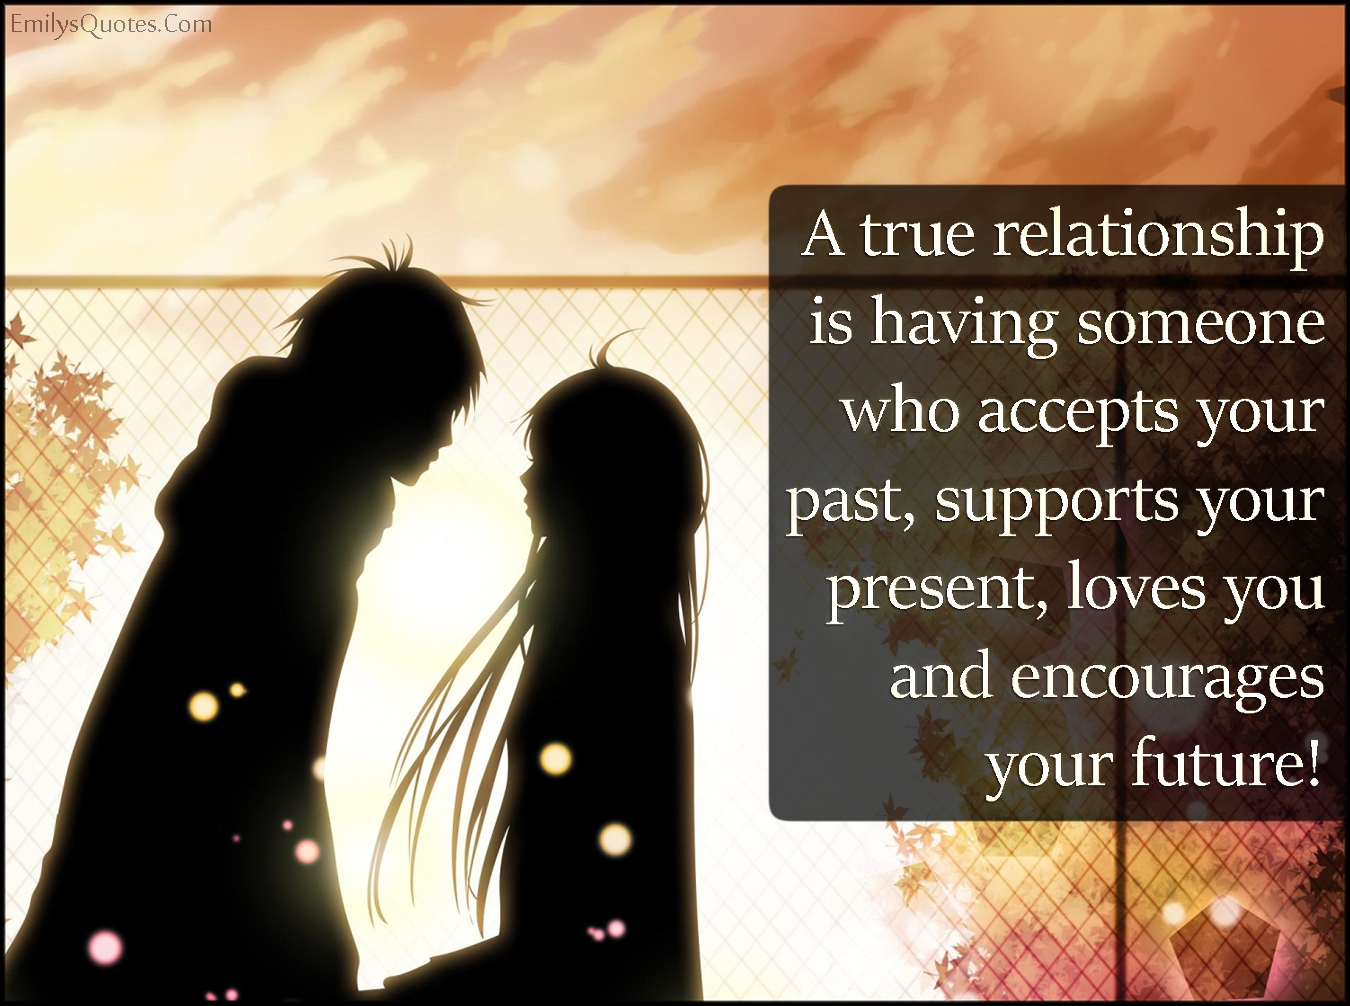 A true relationship is having someone who accepts your past, supports your present, loves you and encourages your future!